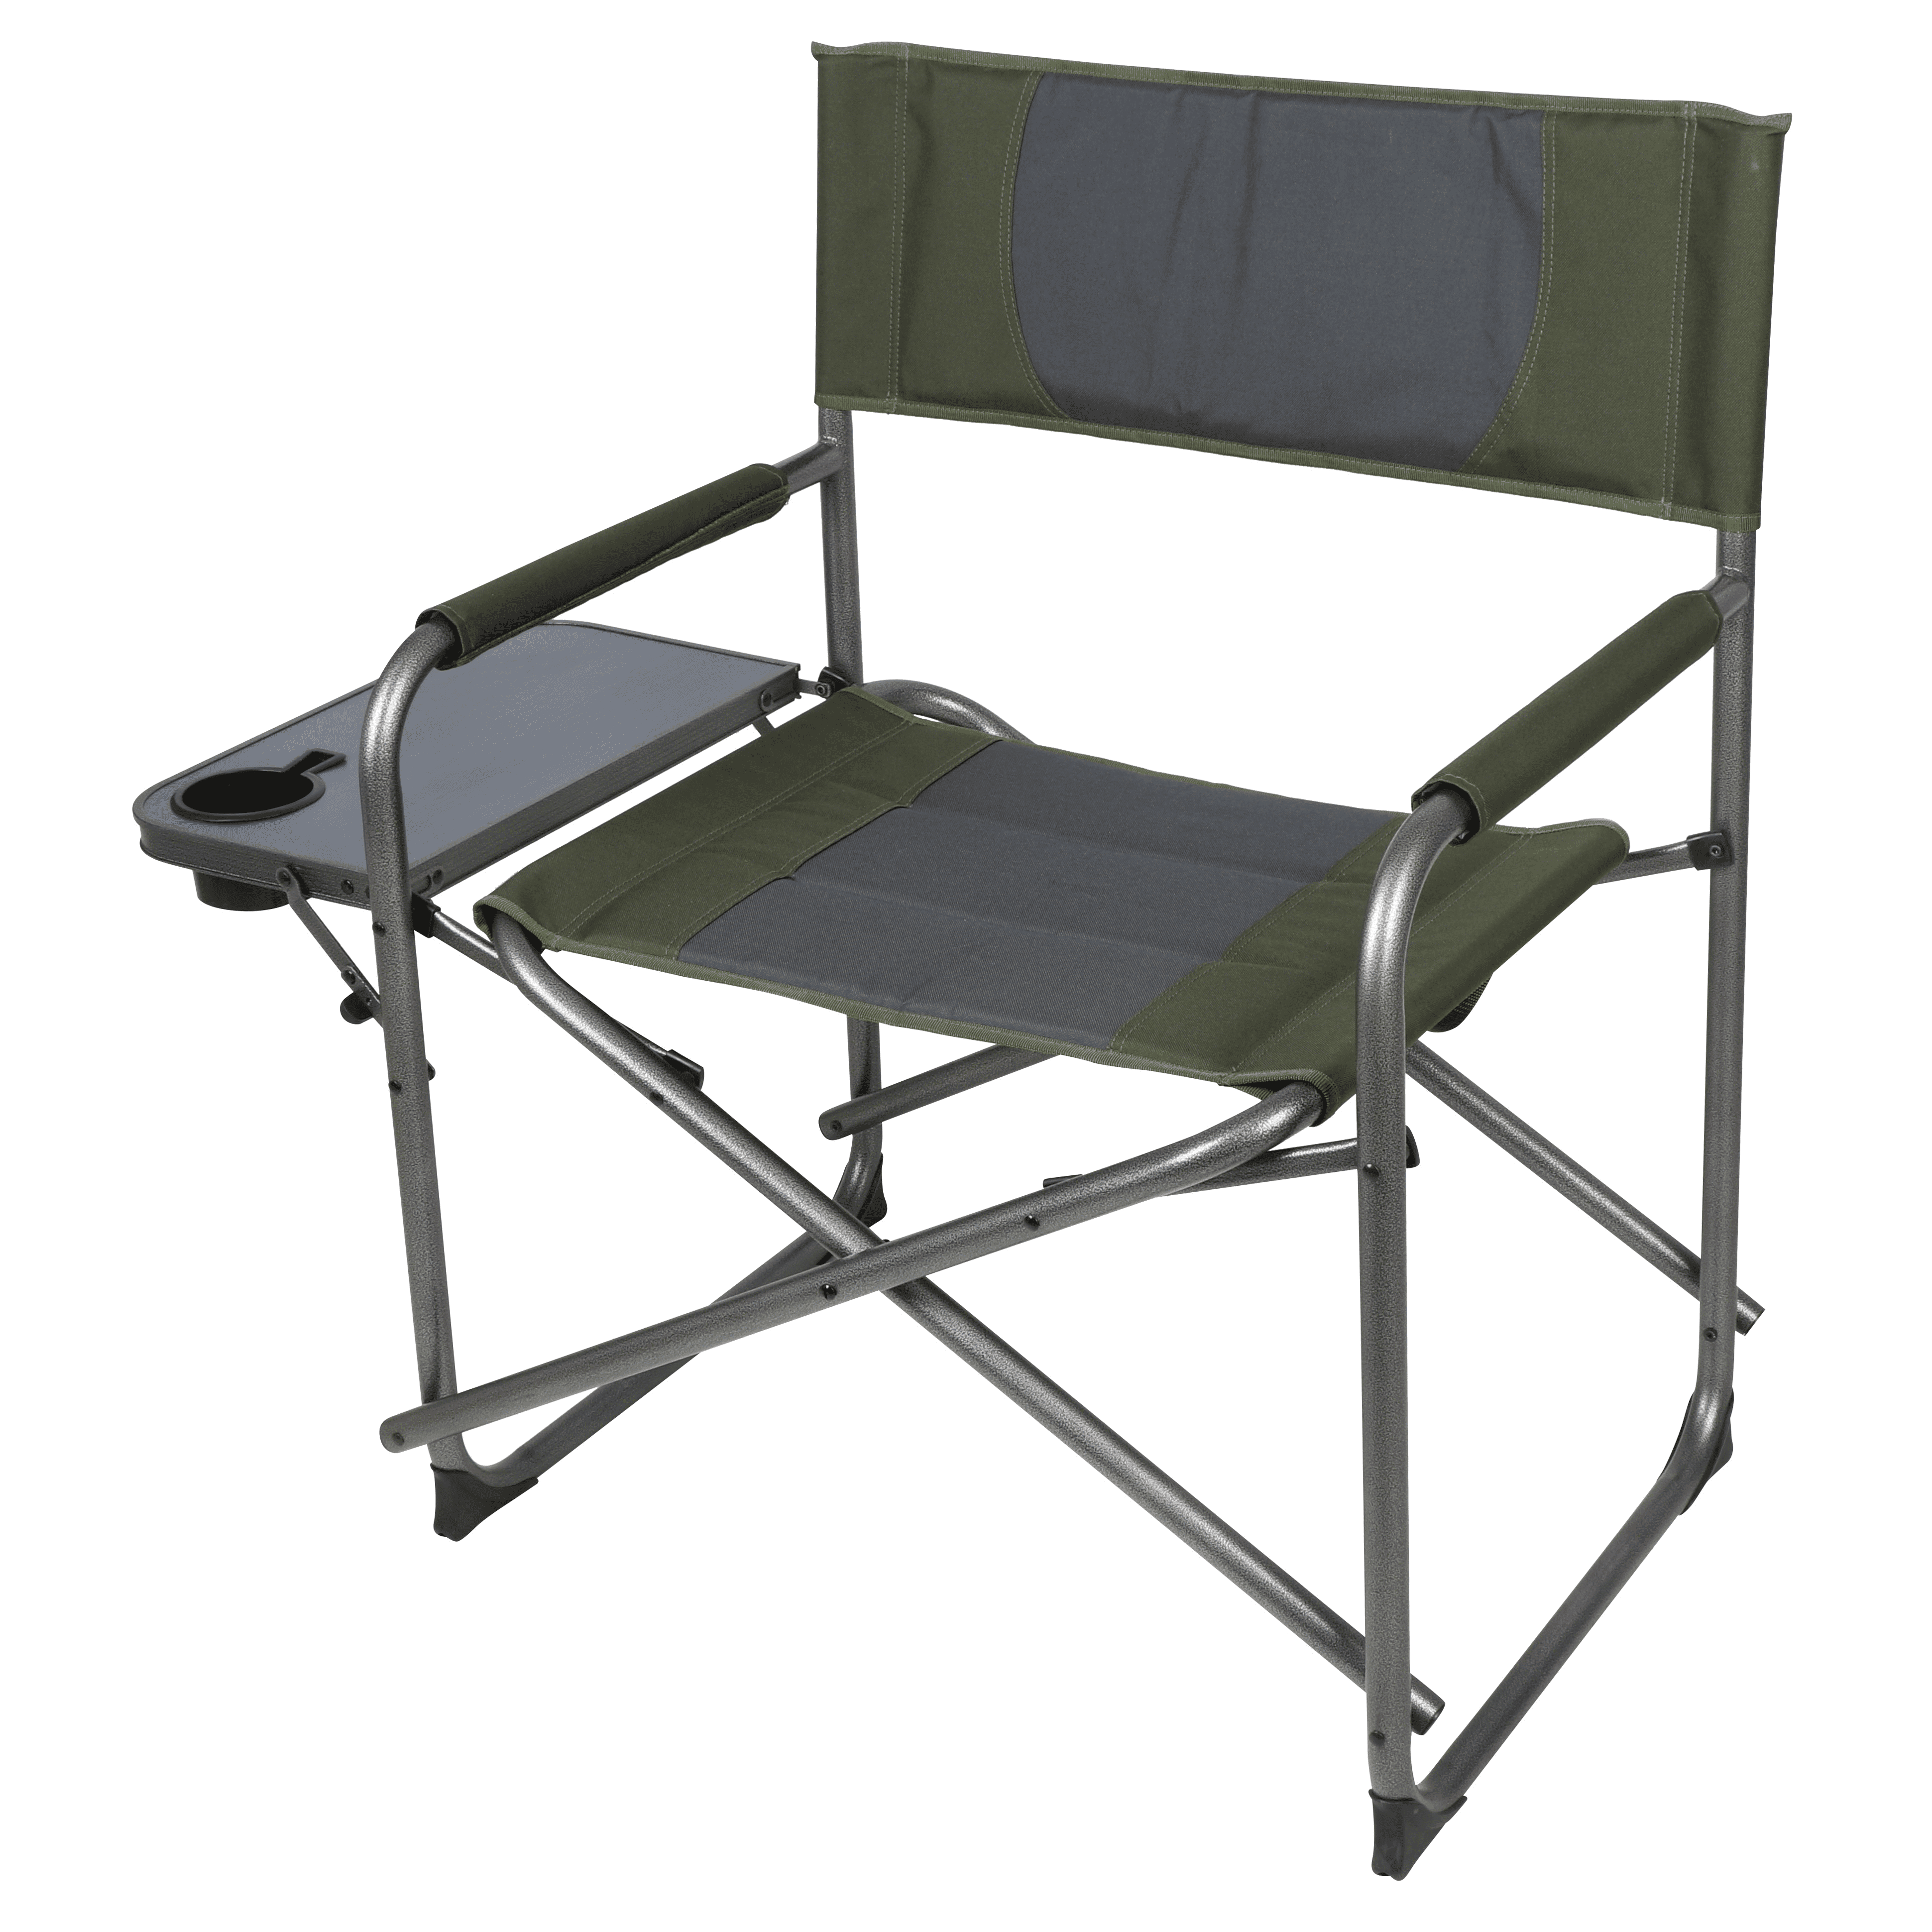 NEW OZTRAIL CLASSIC DIRECTOR'S CHAIR WITH SIDE TABLE PADDED FOLD-AWAY TABLE SEAT 